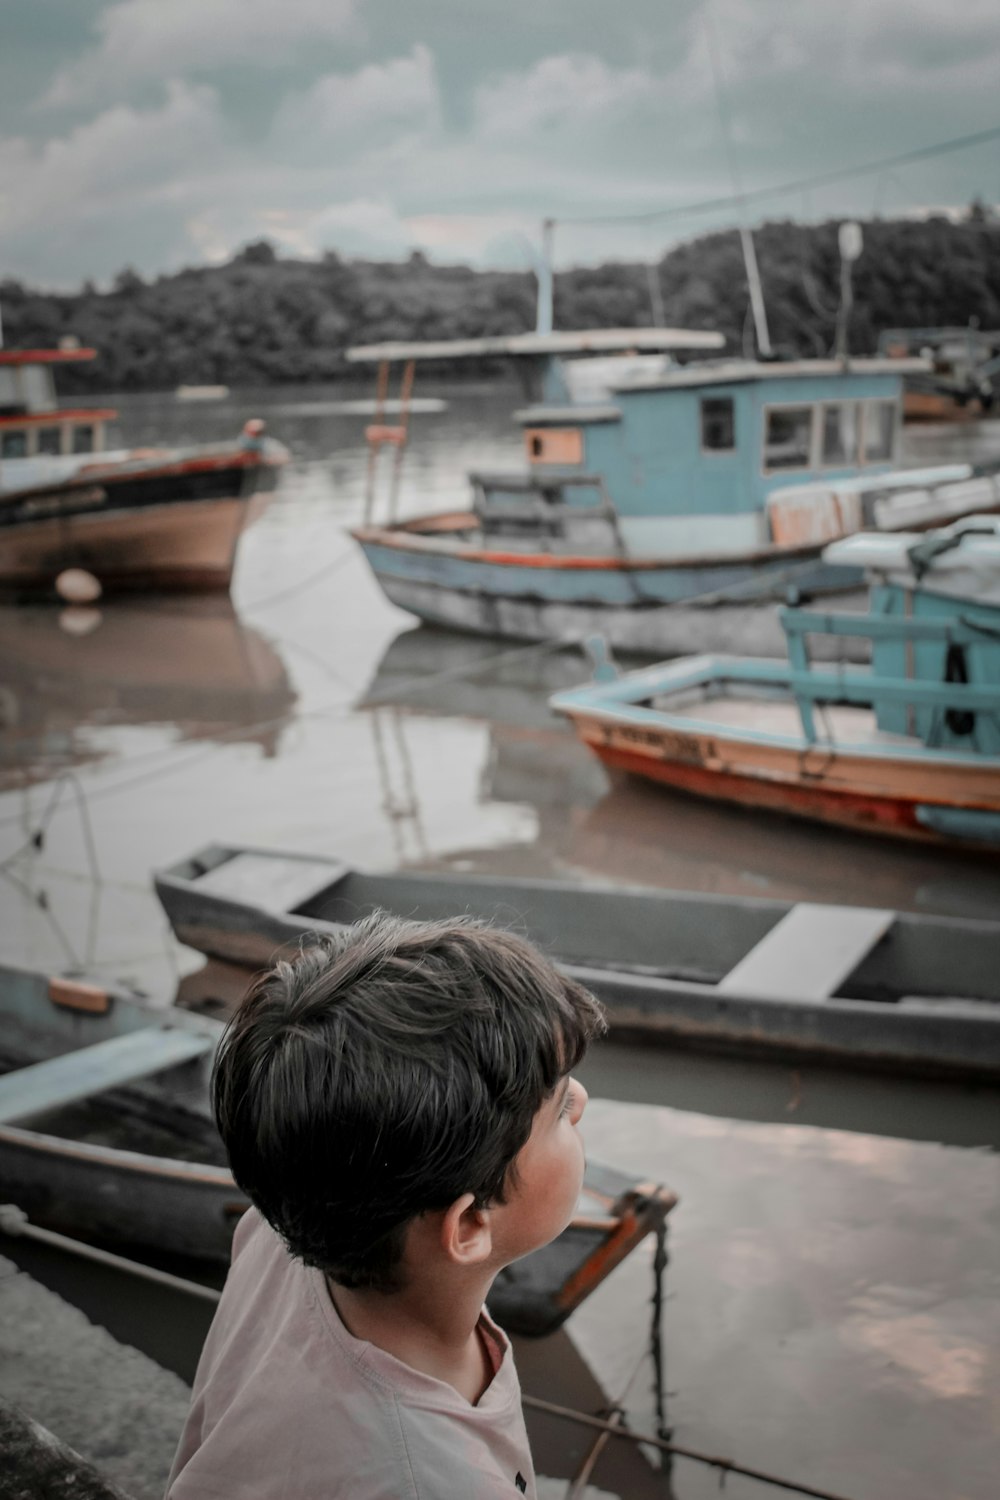 a young boy standing in front of a harbor filled with boats